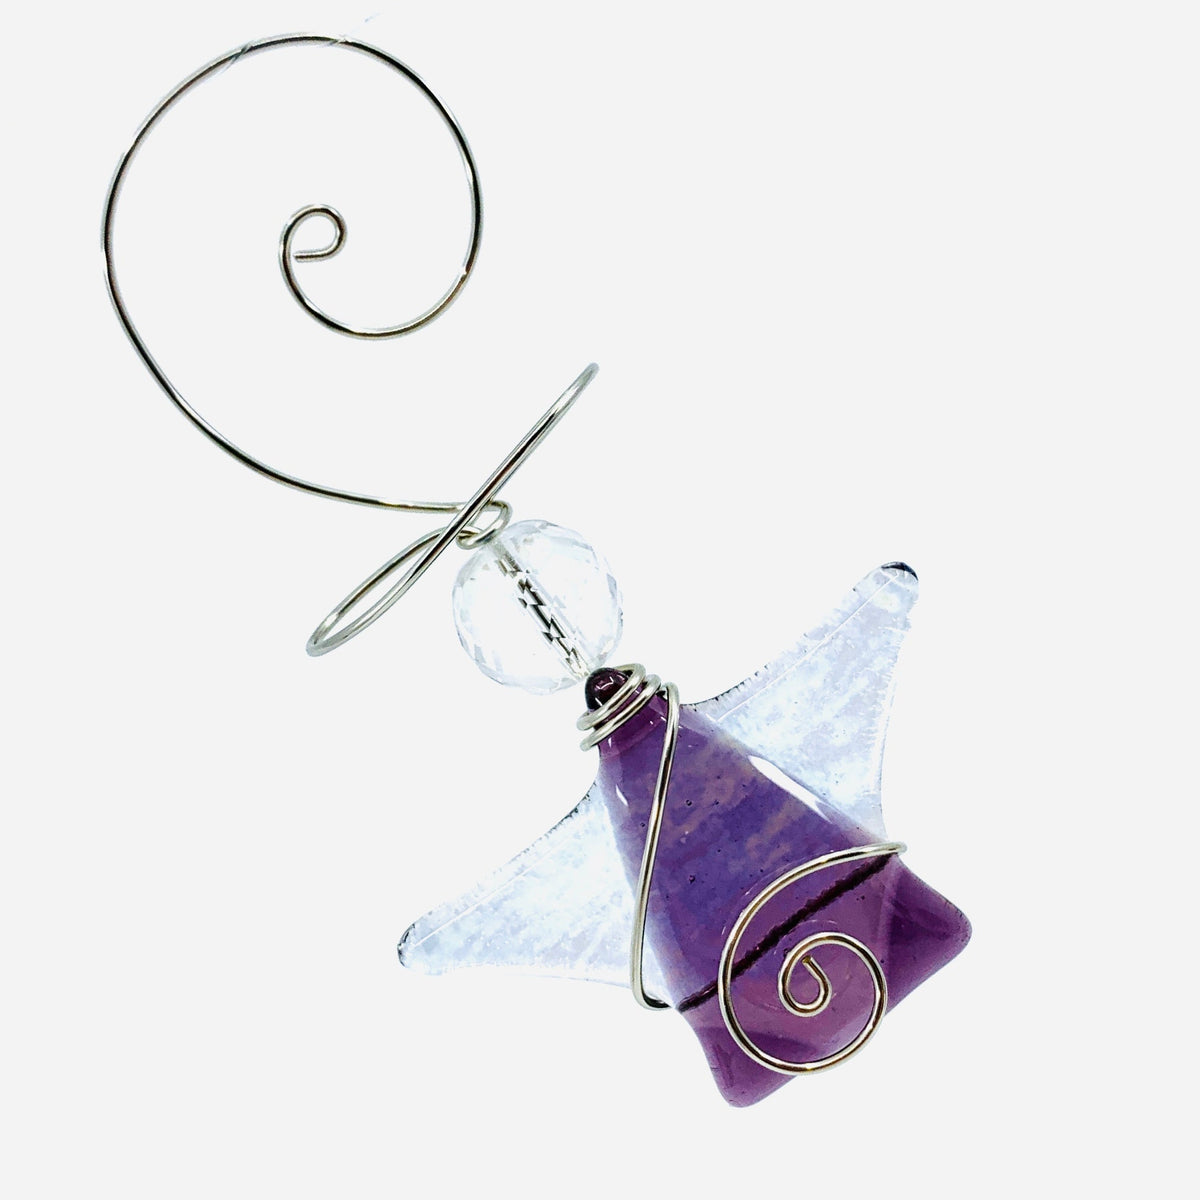 Fused Tiny Angels Ornament Haywire Art Violet 